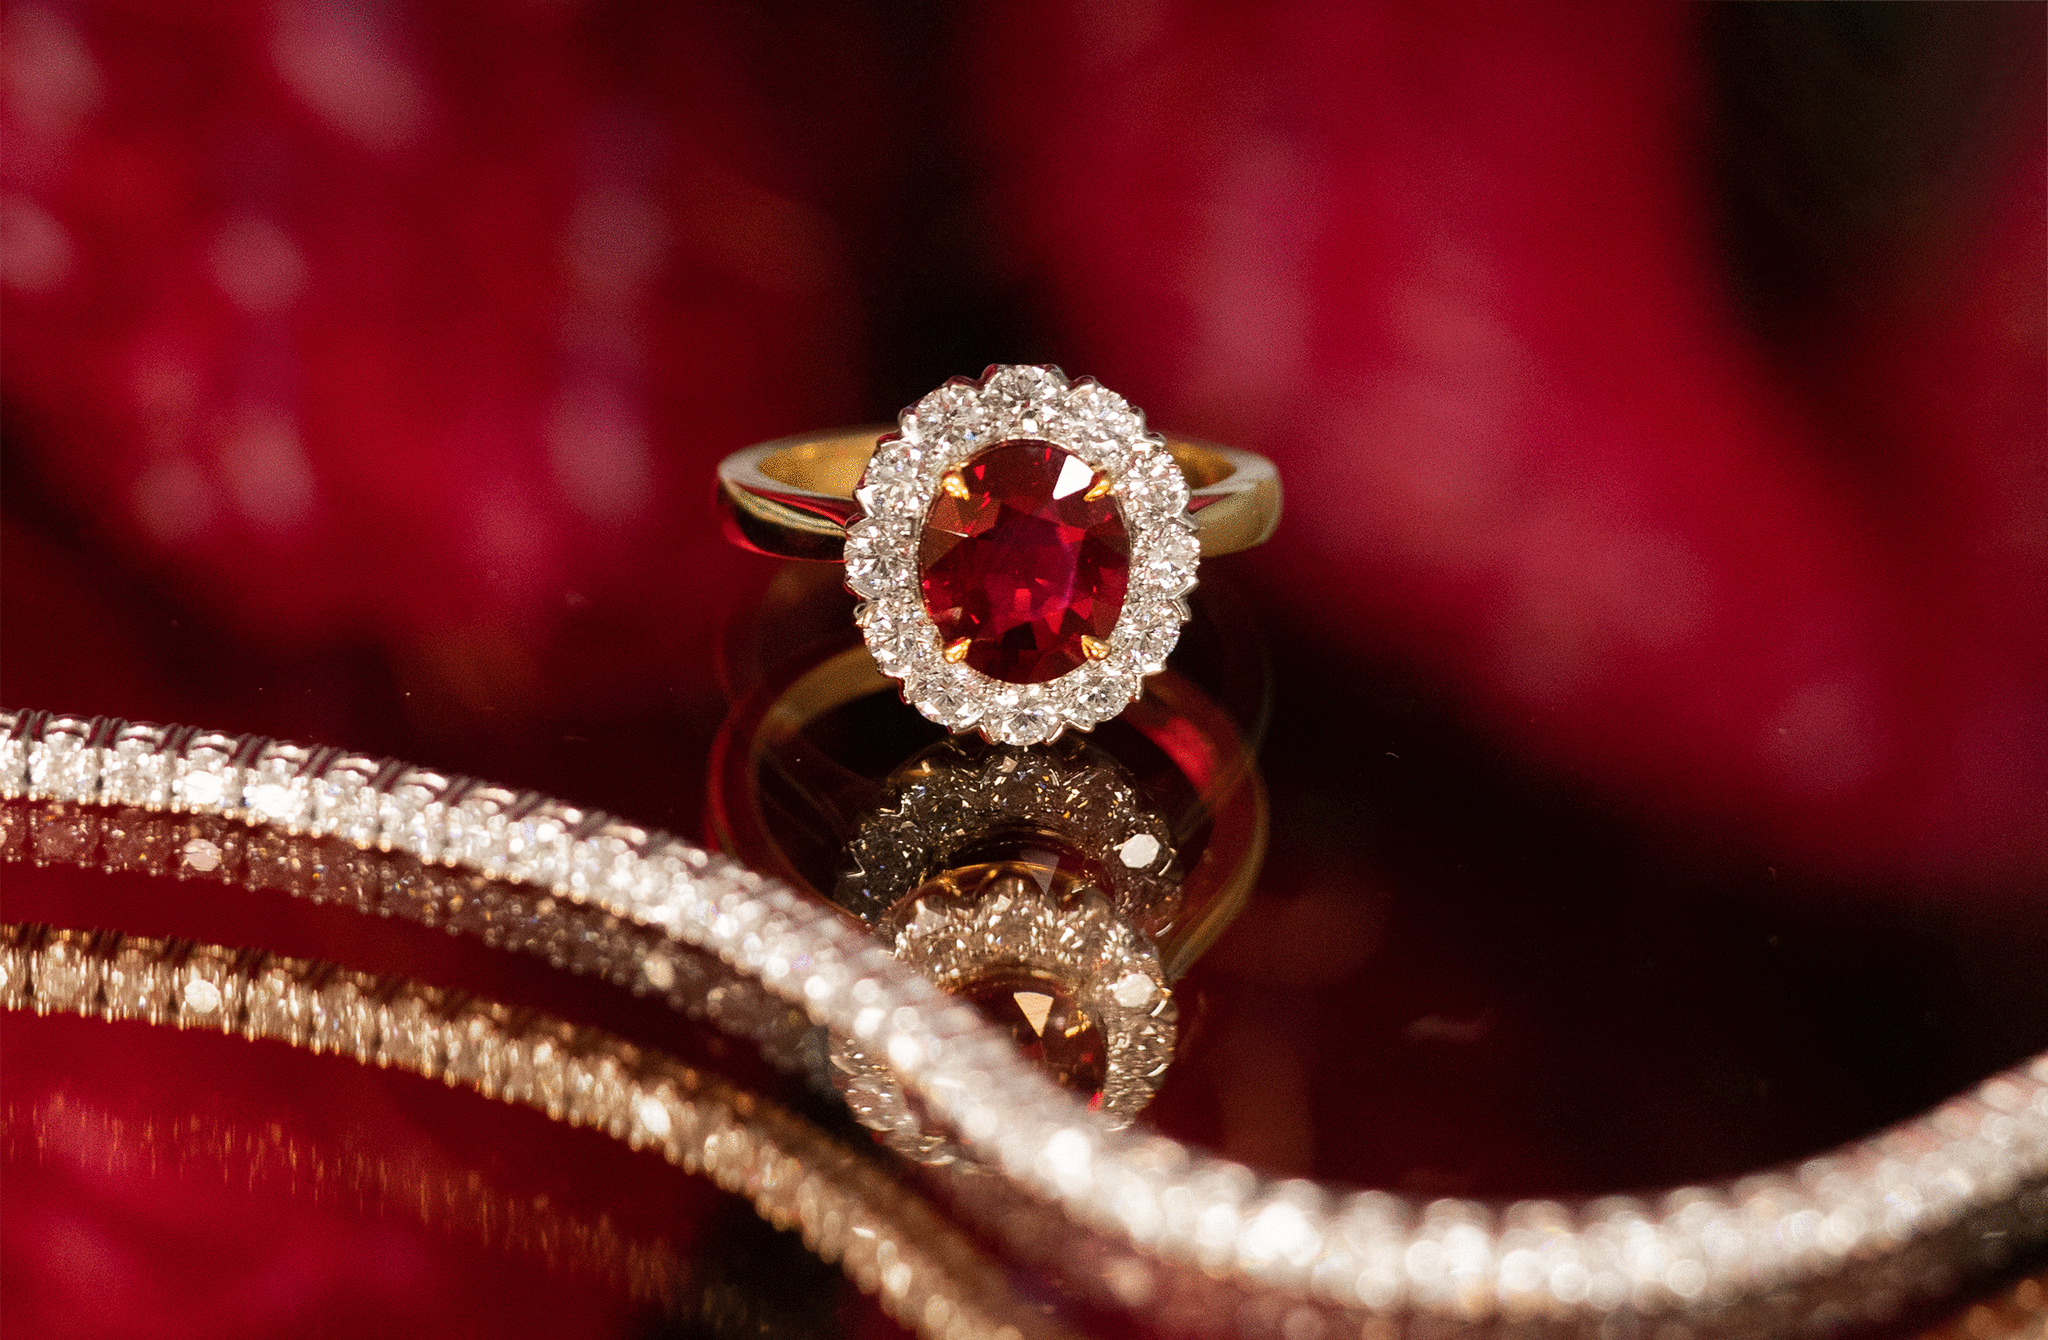 Premium Photo | Closeup of a ring with a large red ruby stone in the center  the ruby appears to be faceted reflecting the light and creating a dazzling  sparkle the band